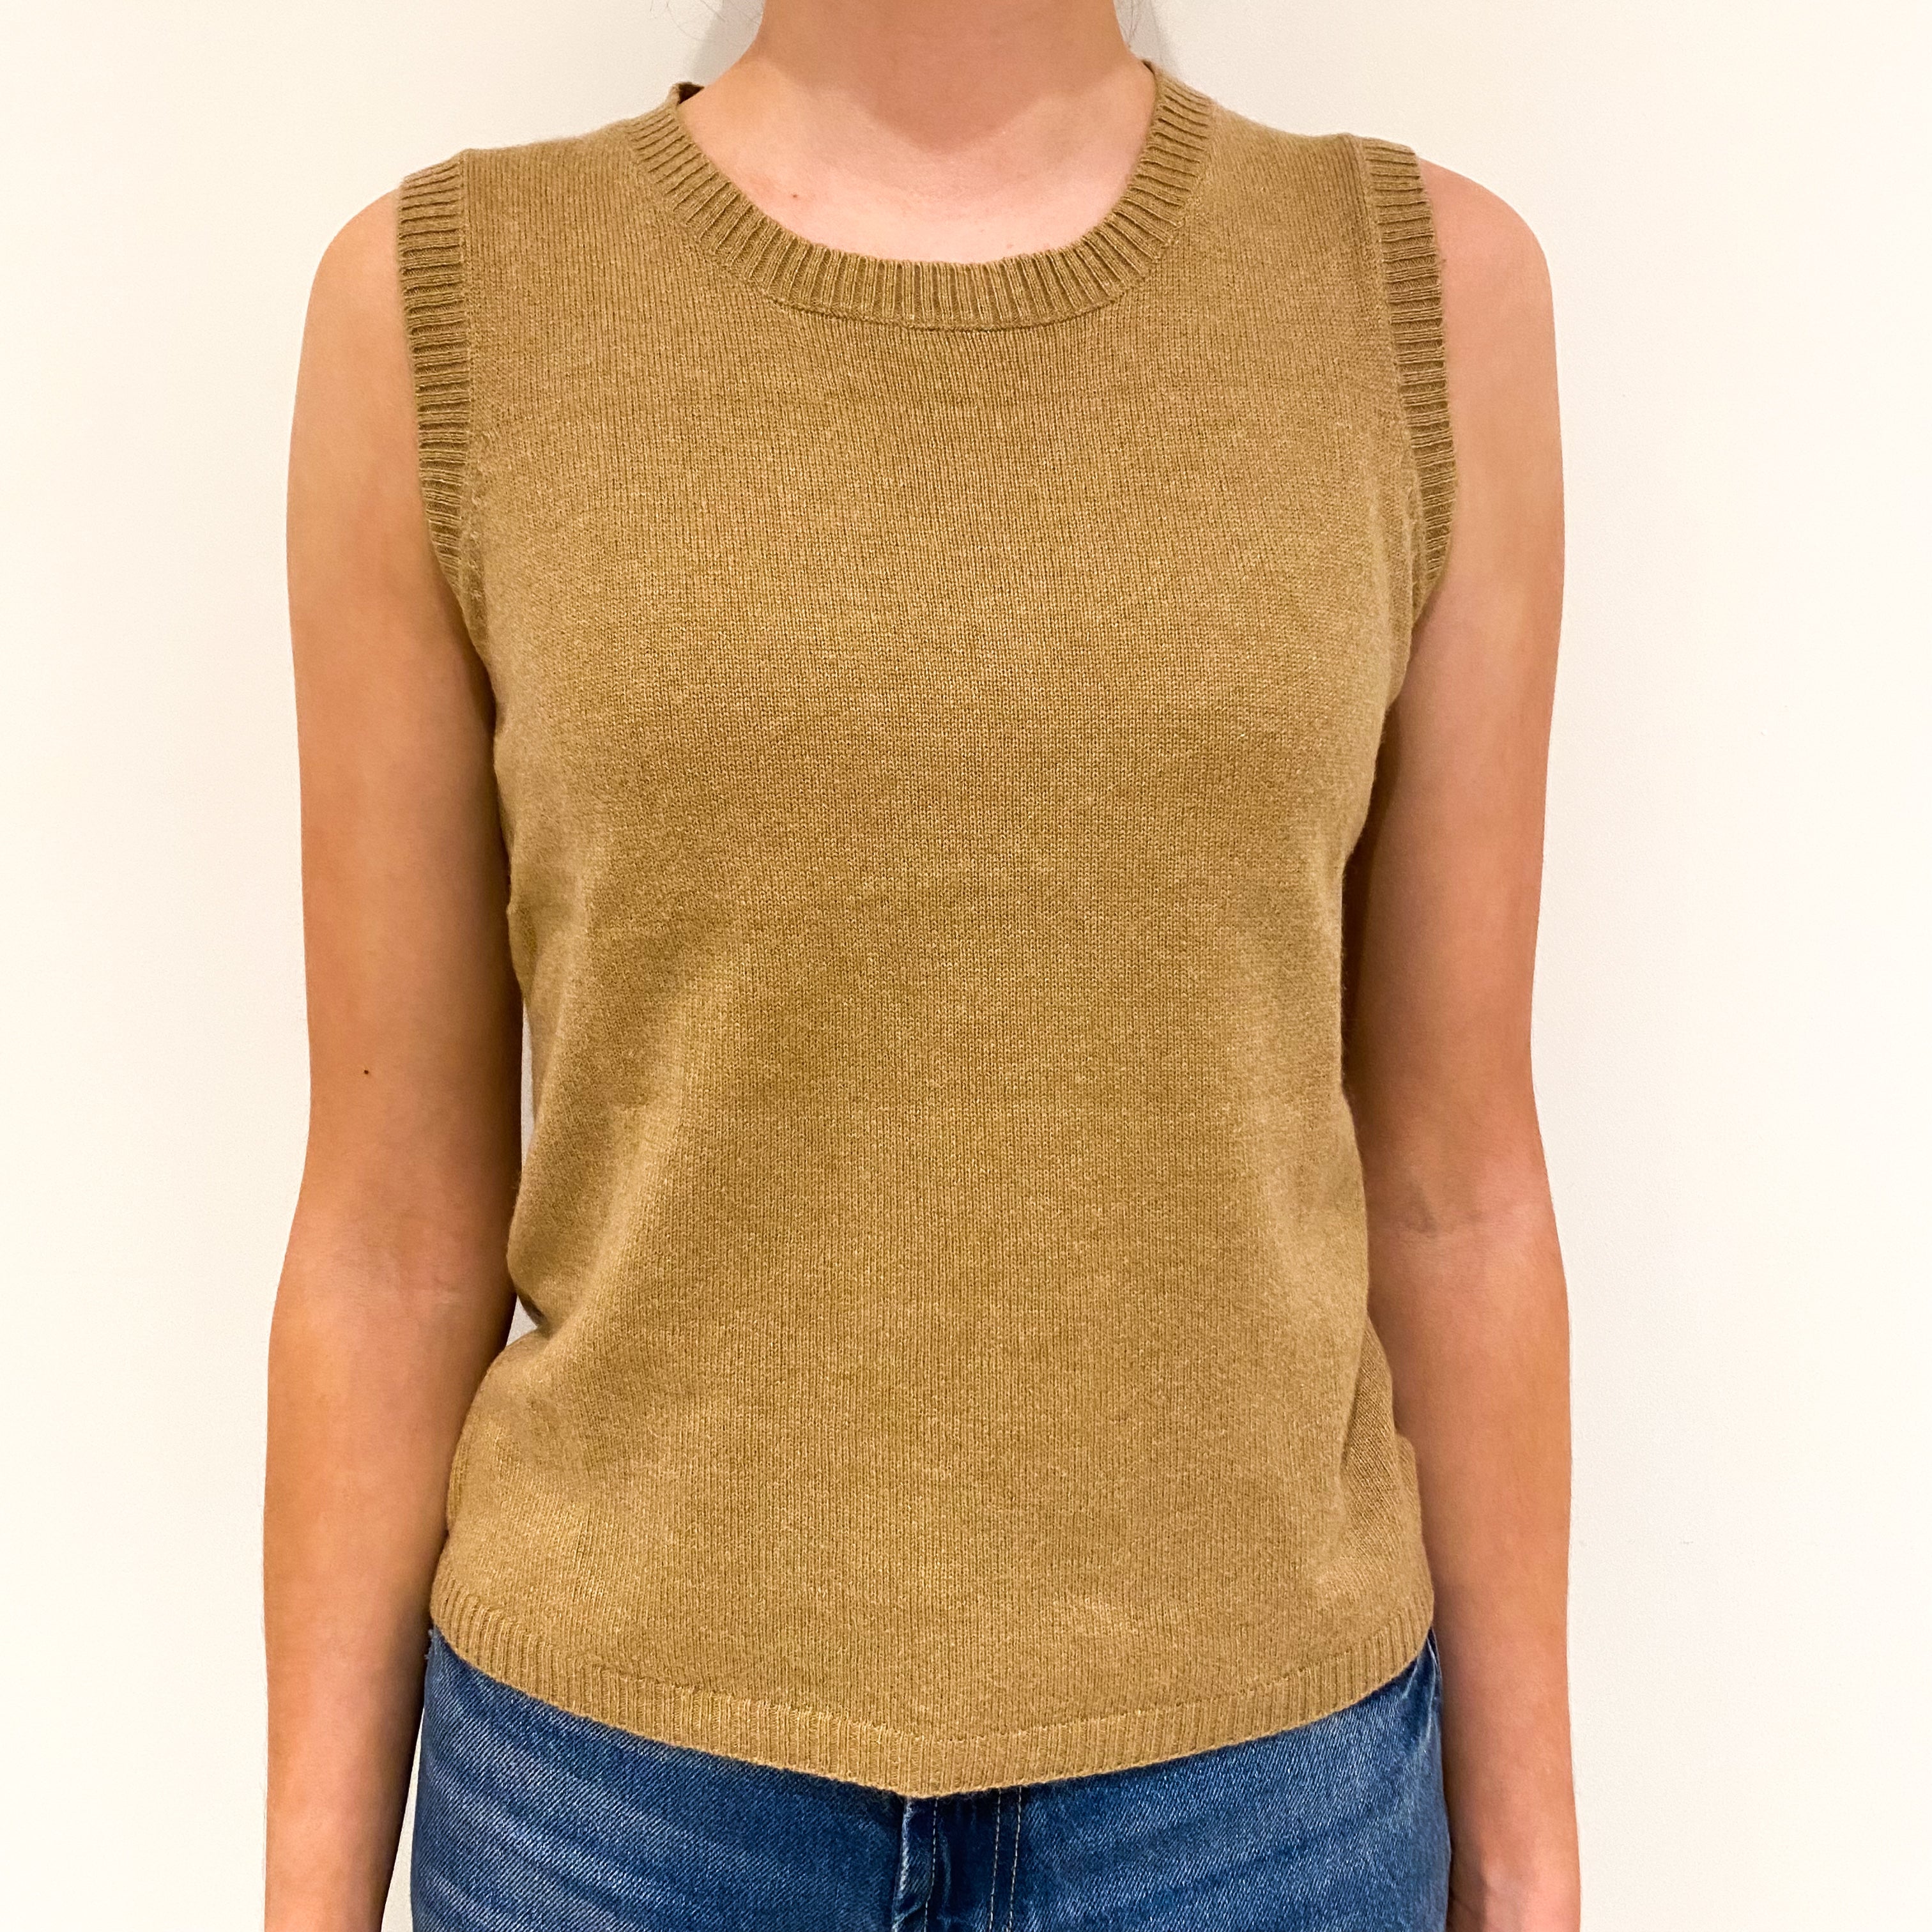 Camel Brown Cashmere Crew Neck Jumper Extra Small